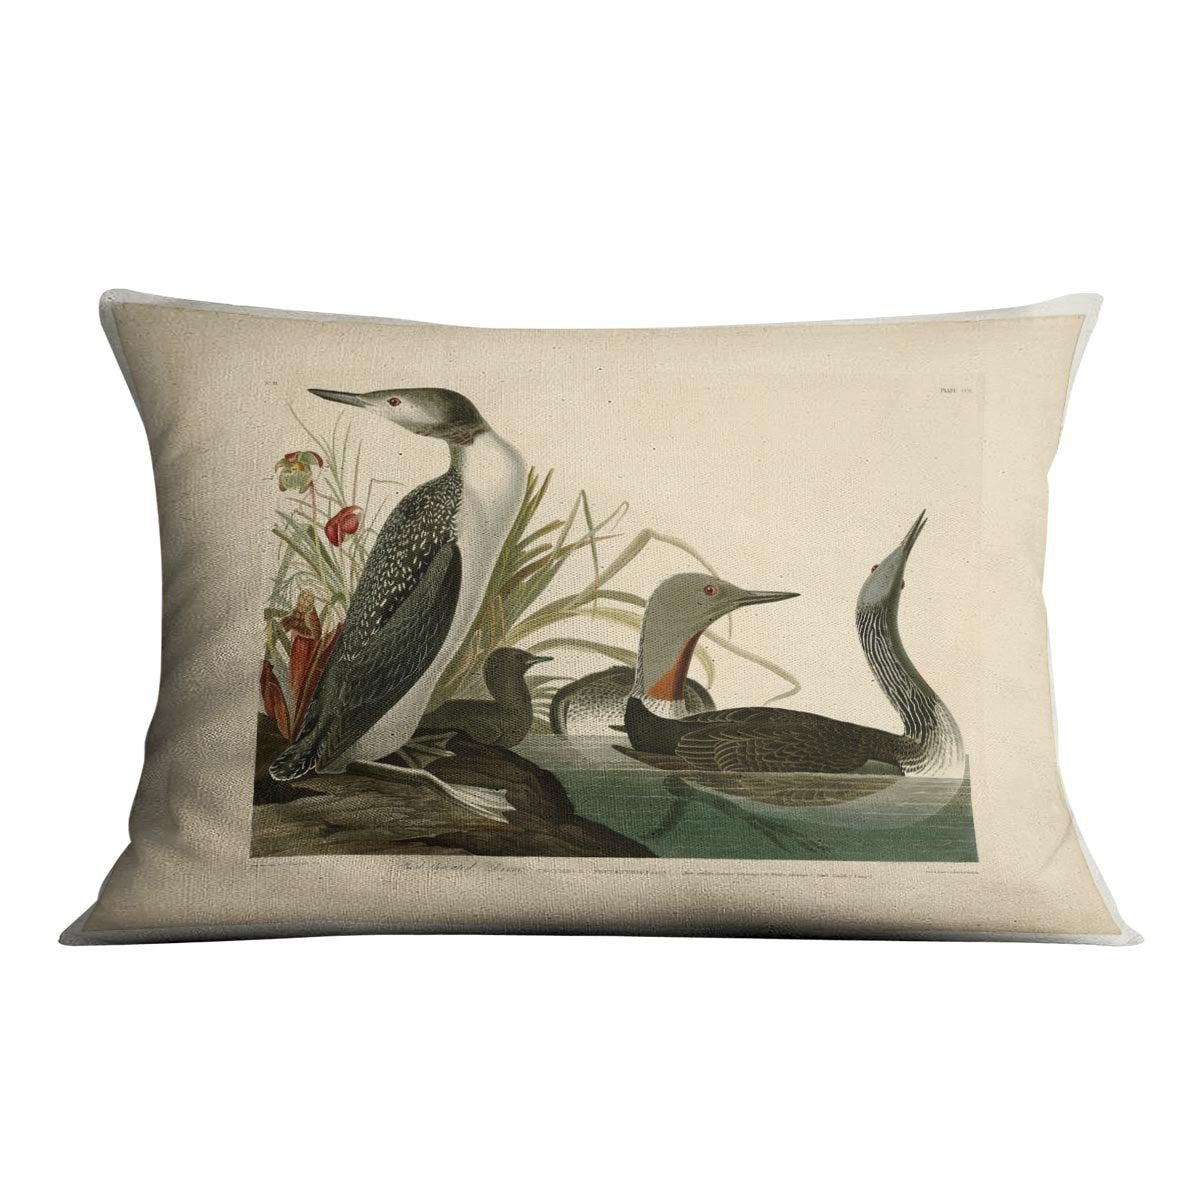 Red Throated Diver by Audubon Cushion